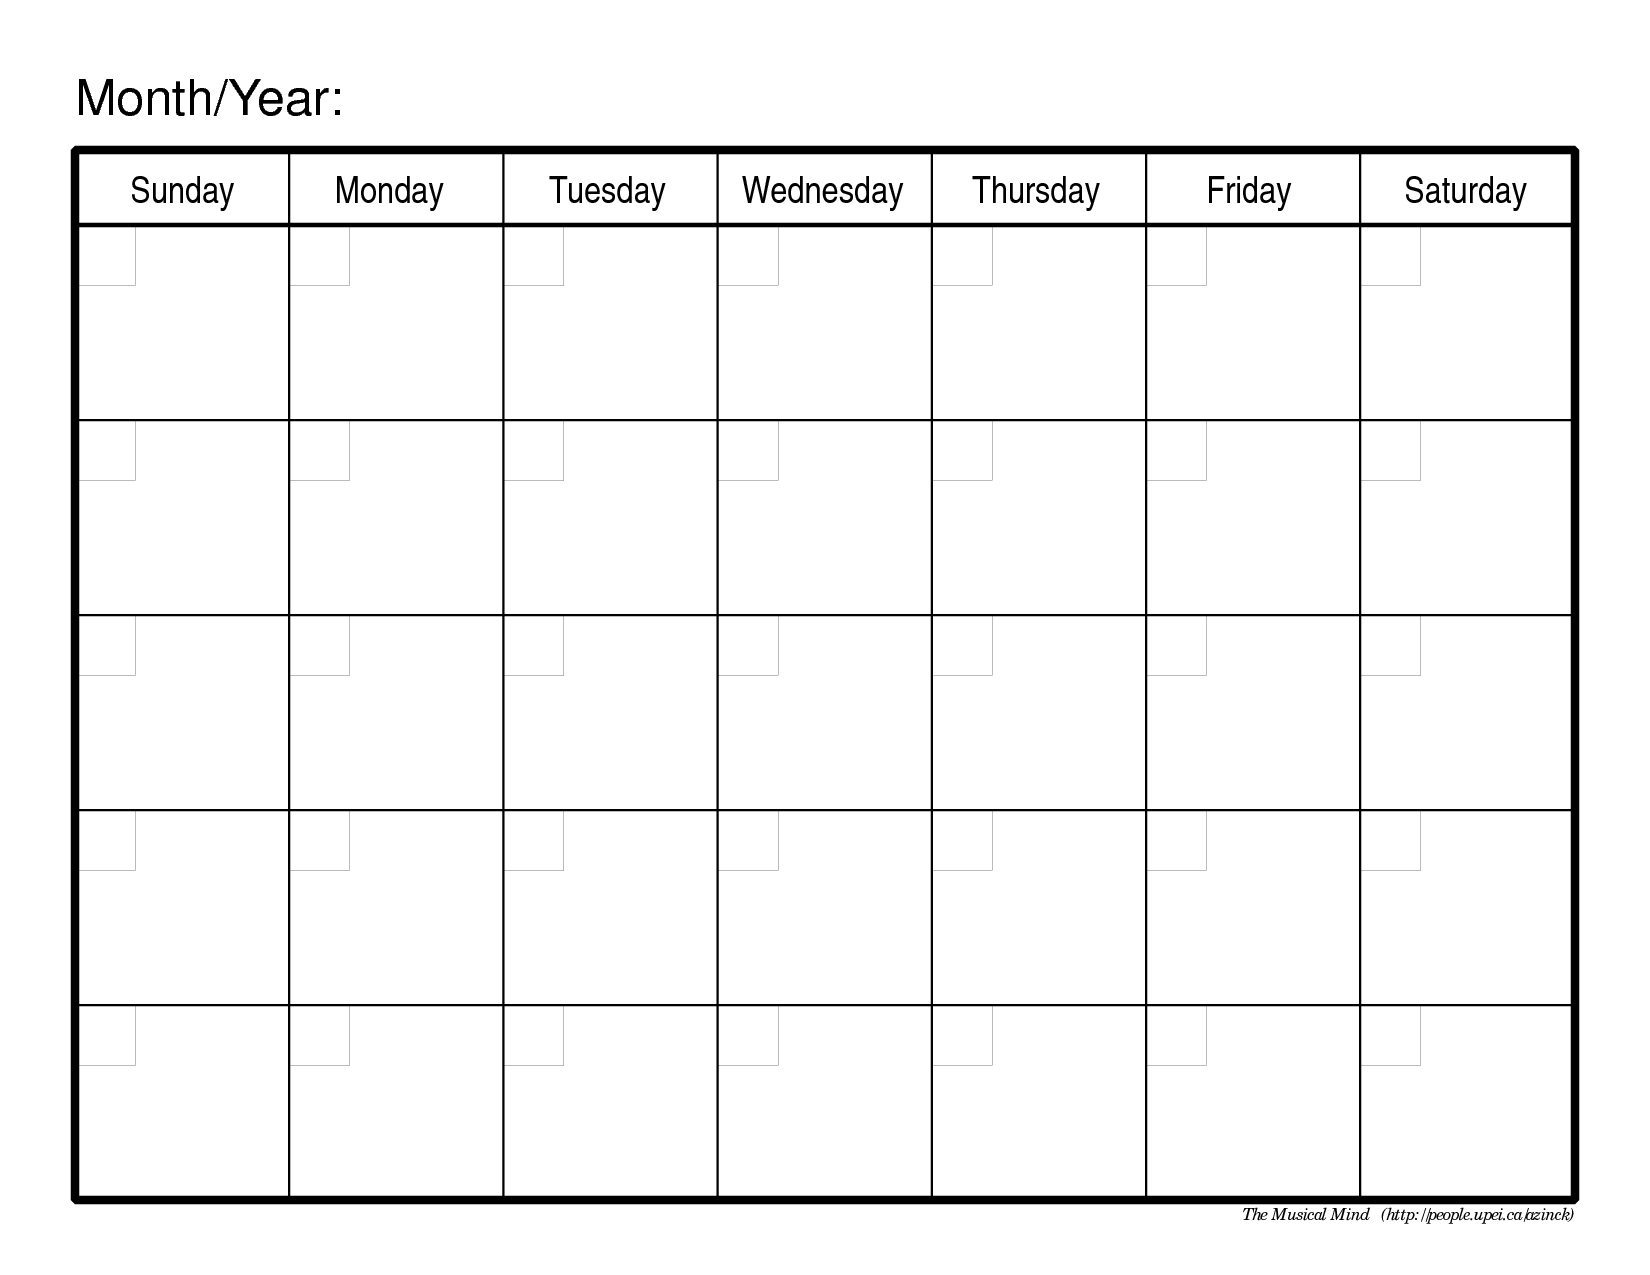 Monthly Calendar Template | Free Printable Calendar-Blank Monthly Calendar Template To Fill In